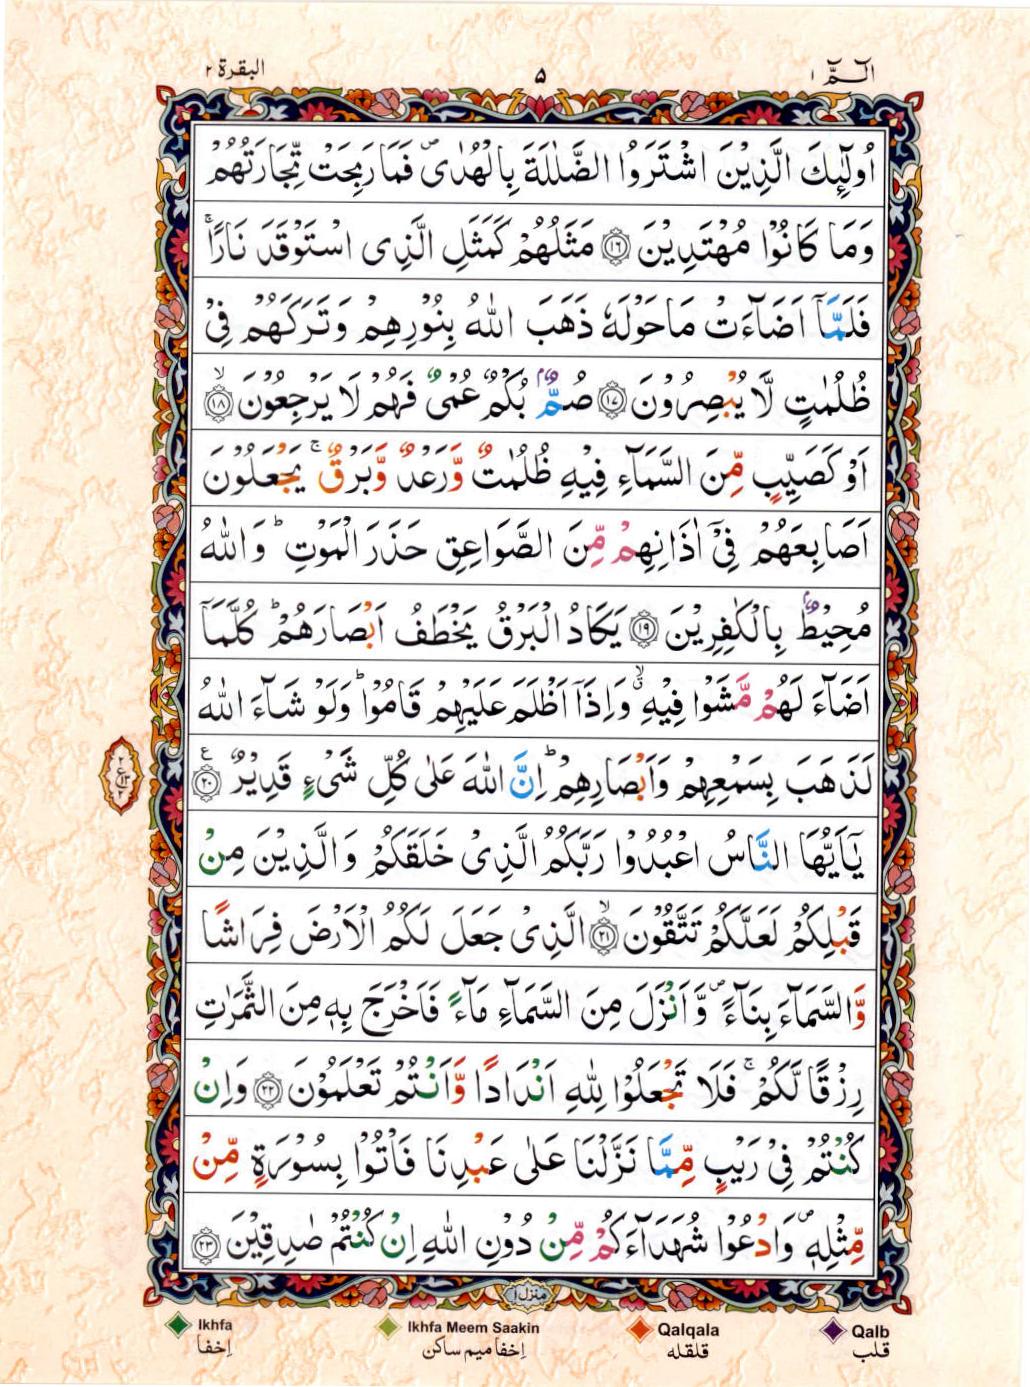 Read 15 Lines Coloured Coded Quran Part 1 Page No 5, Practice Quran